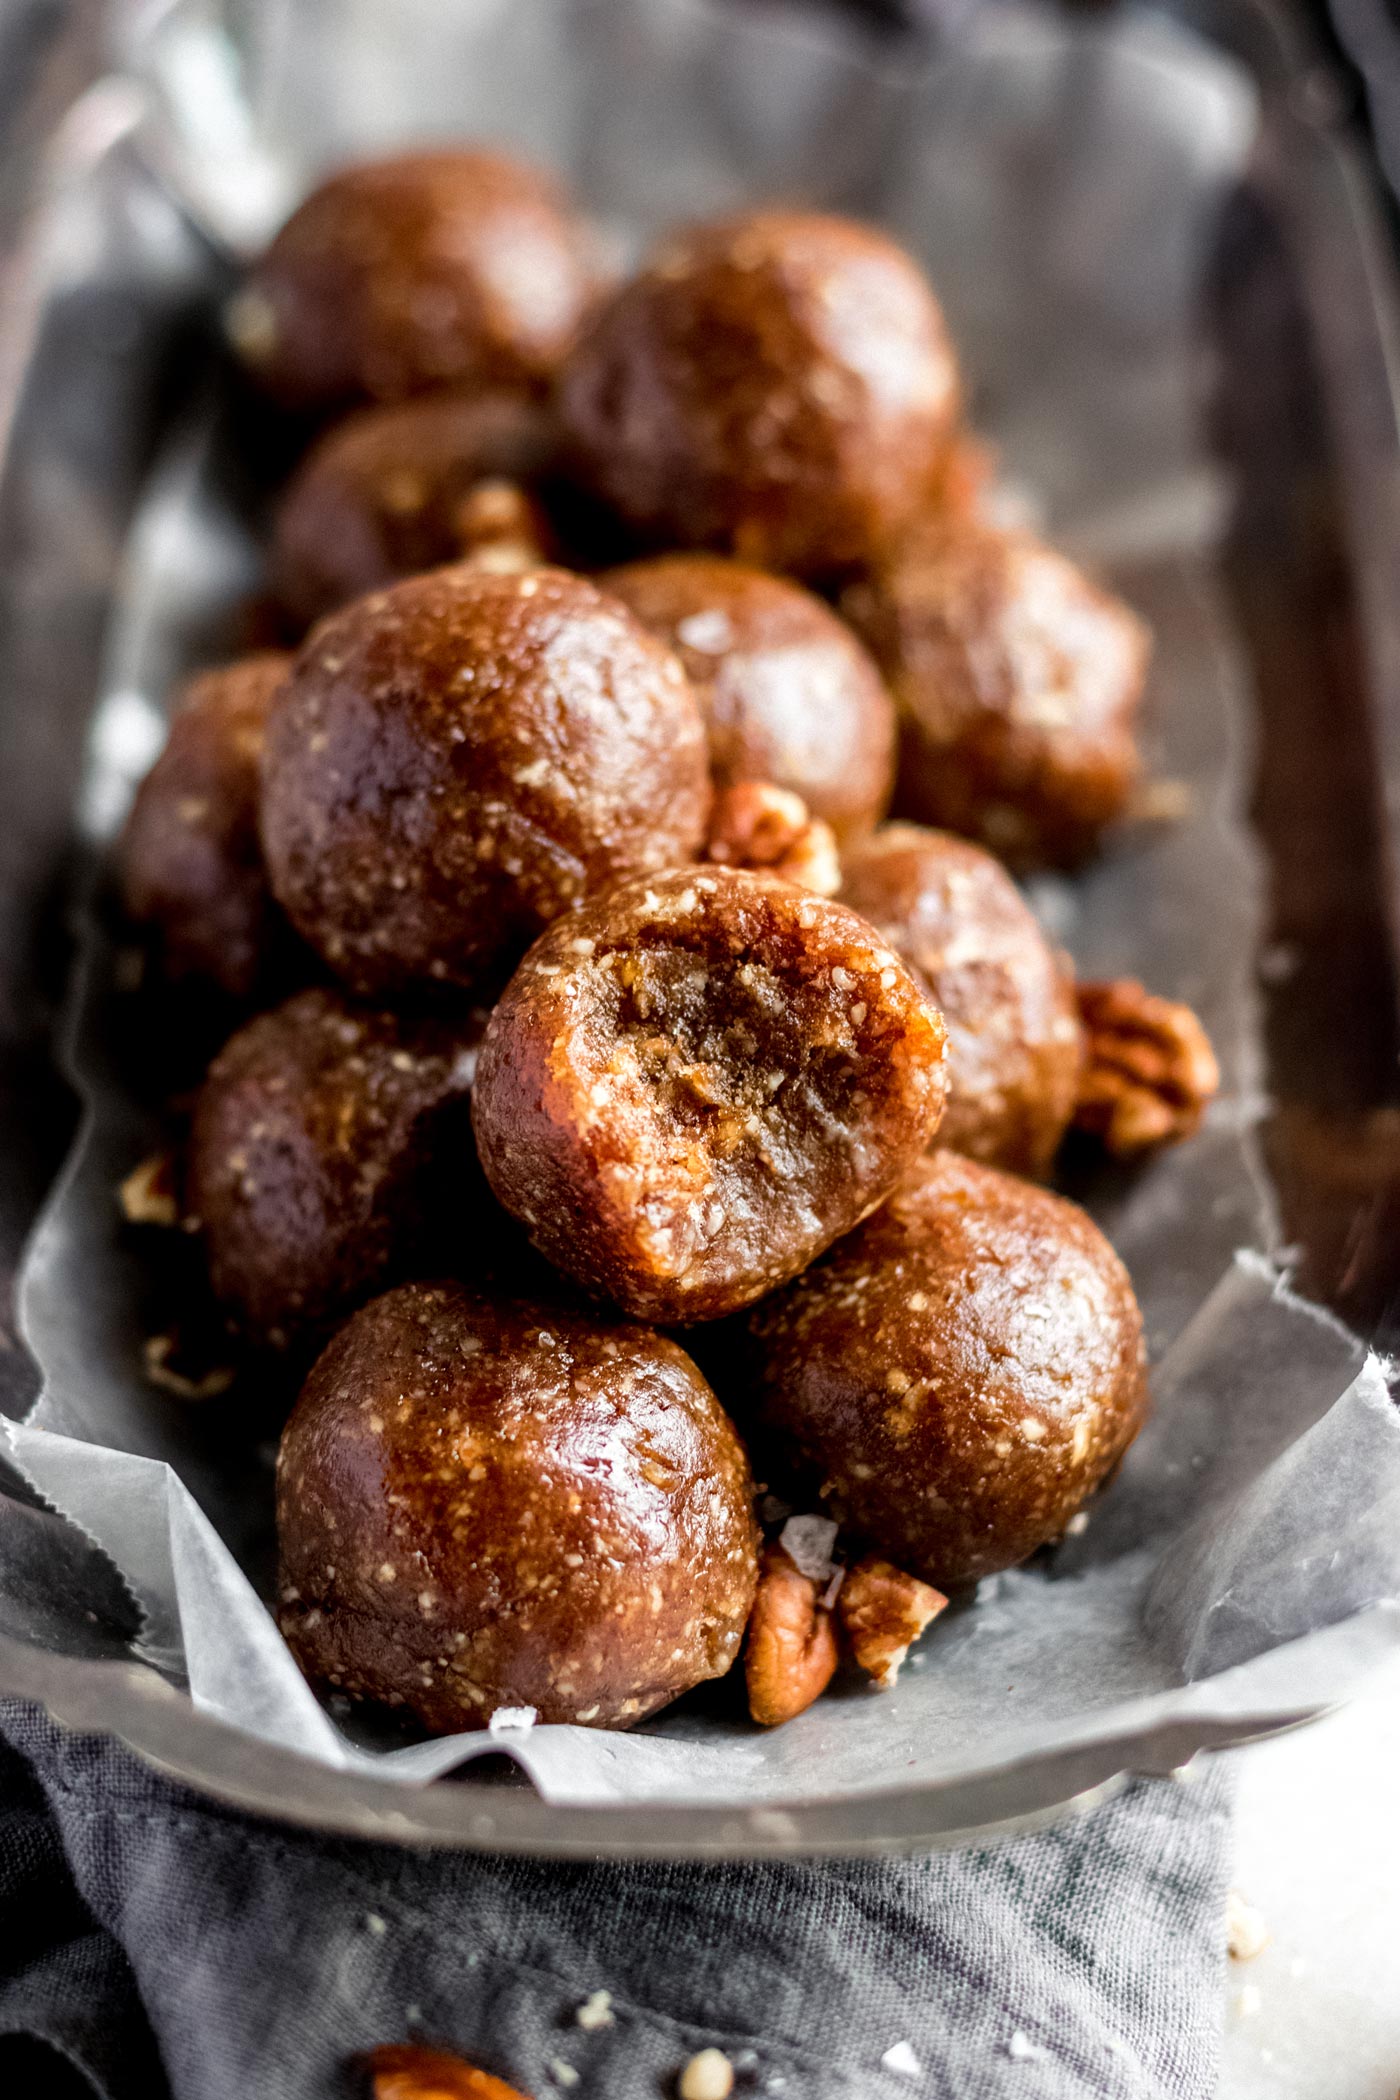 A serving plate of pecan pie balls made from blended pecans and dates. One ball on top has a bite out of it.